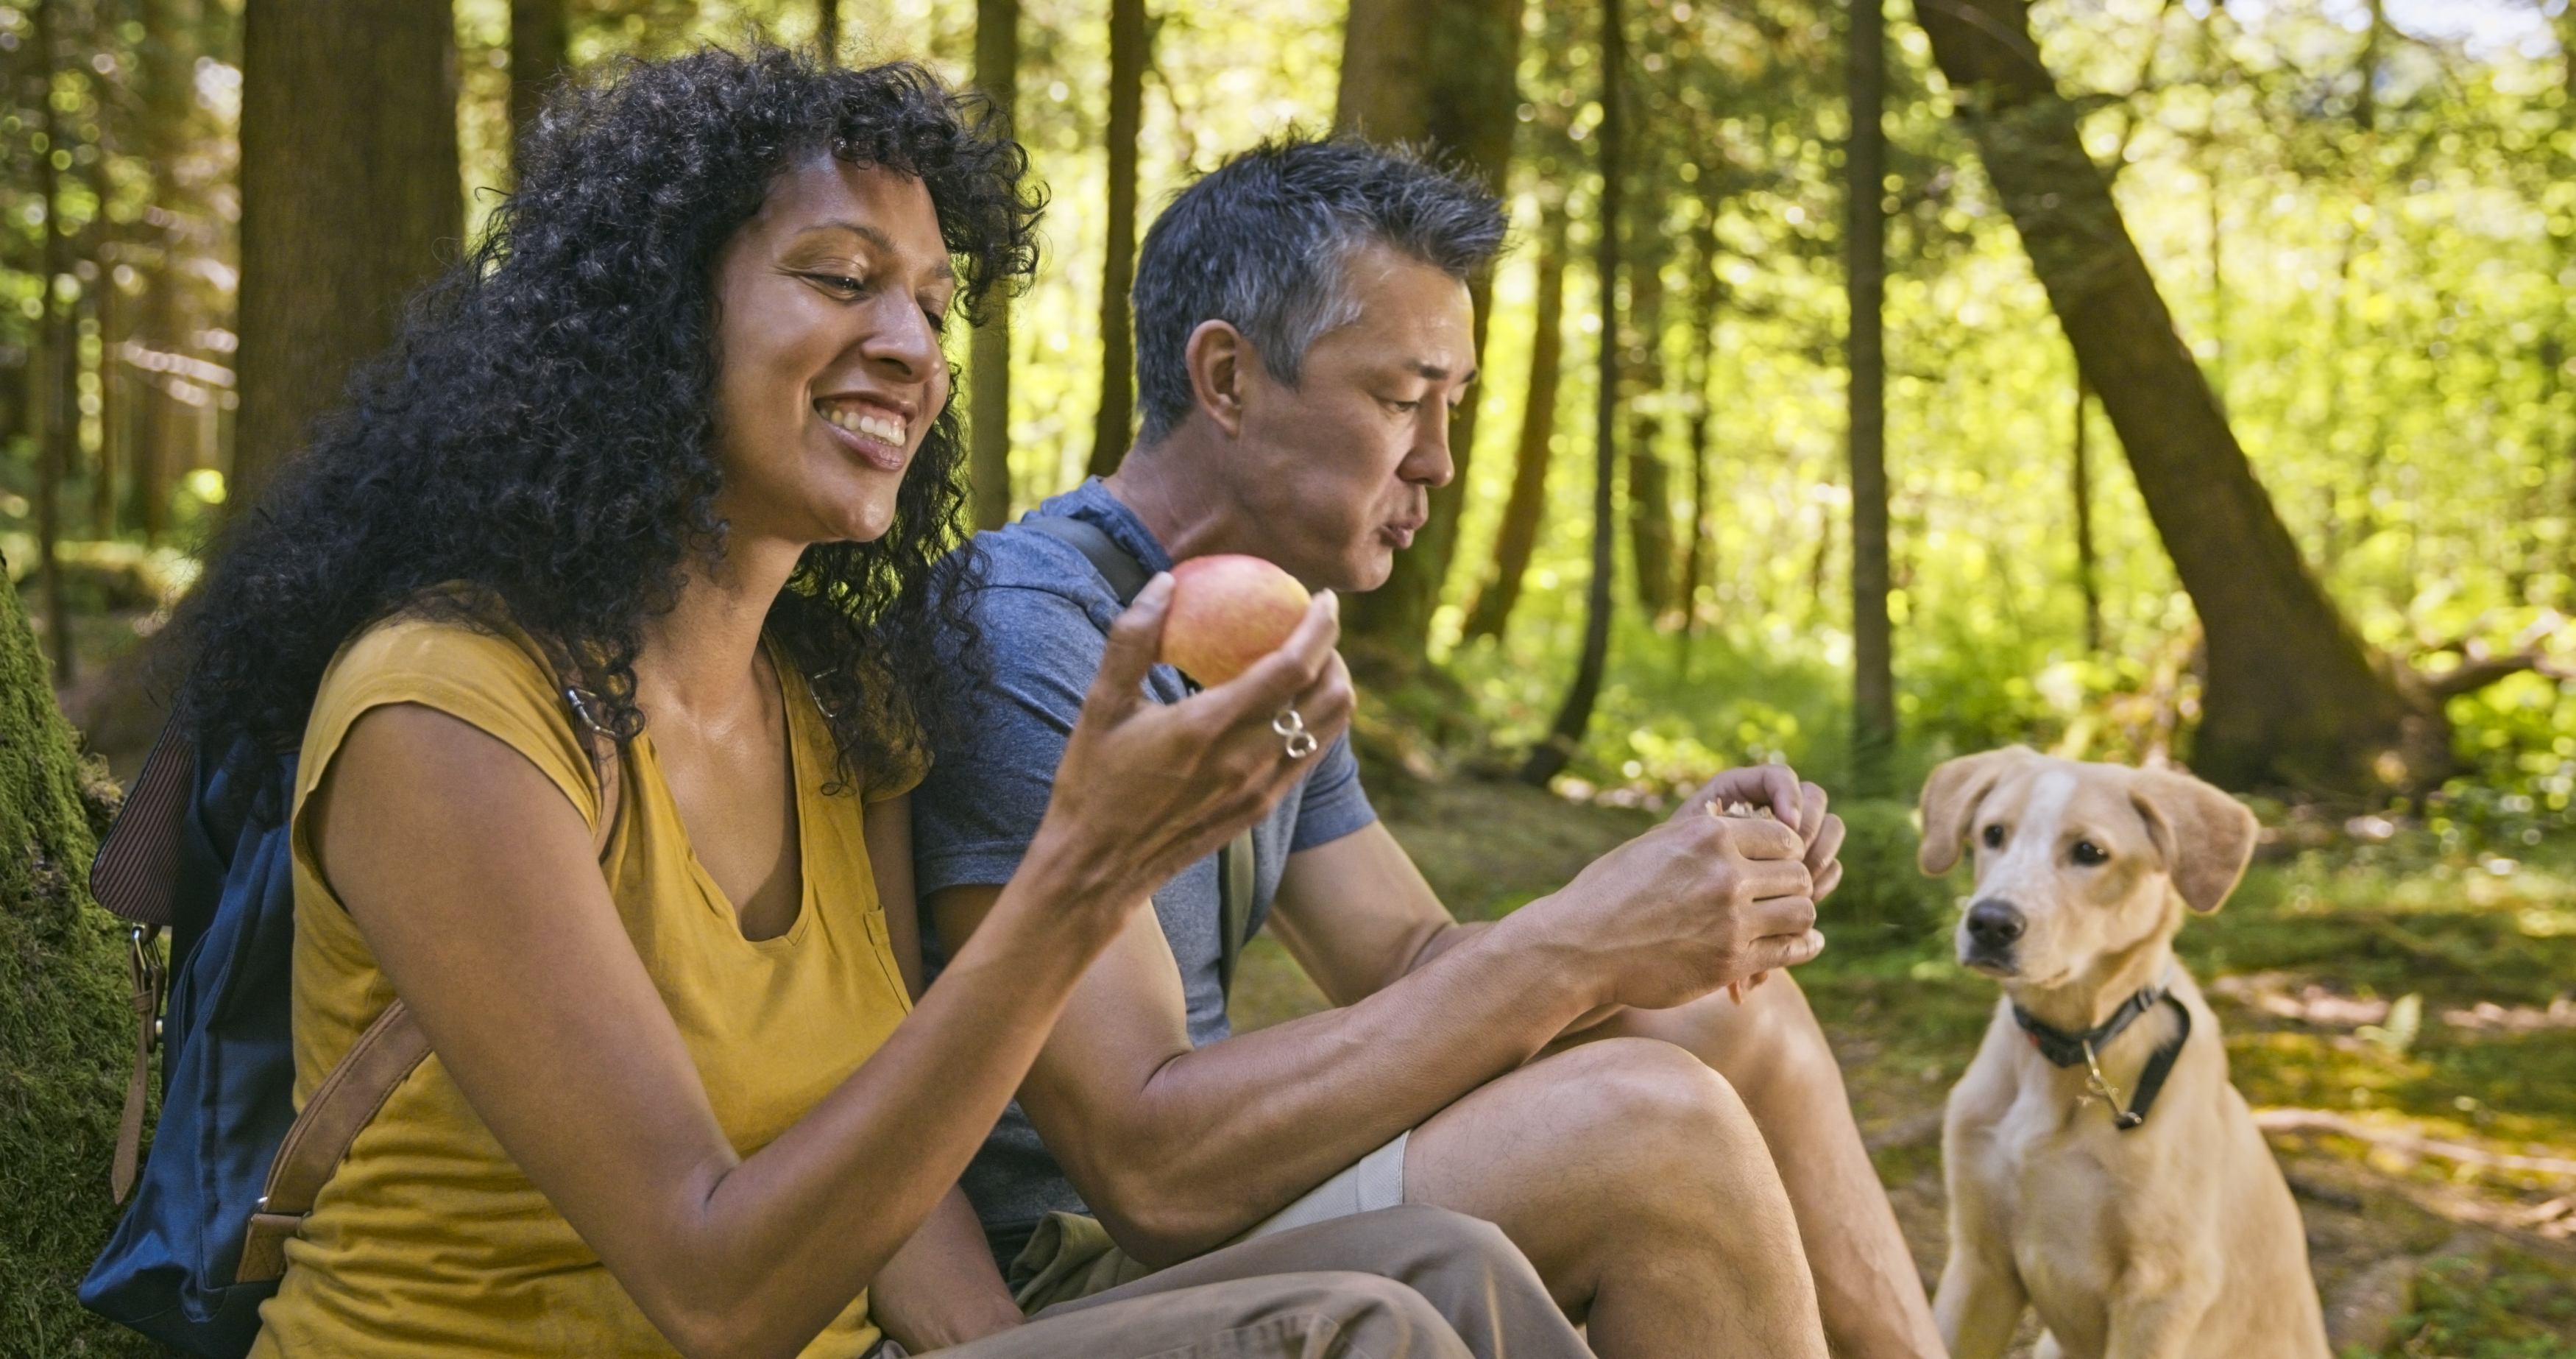 Man and woman sitting in the forest and eating lunch with their dog.